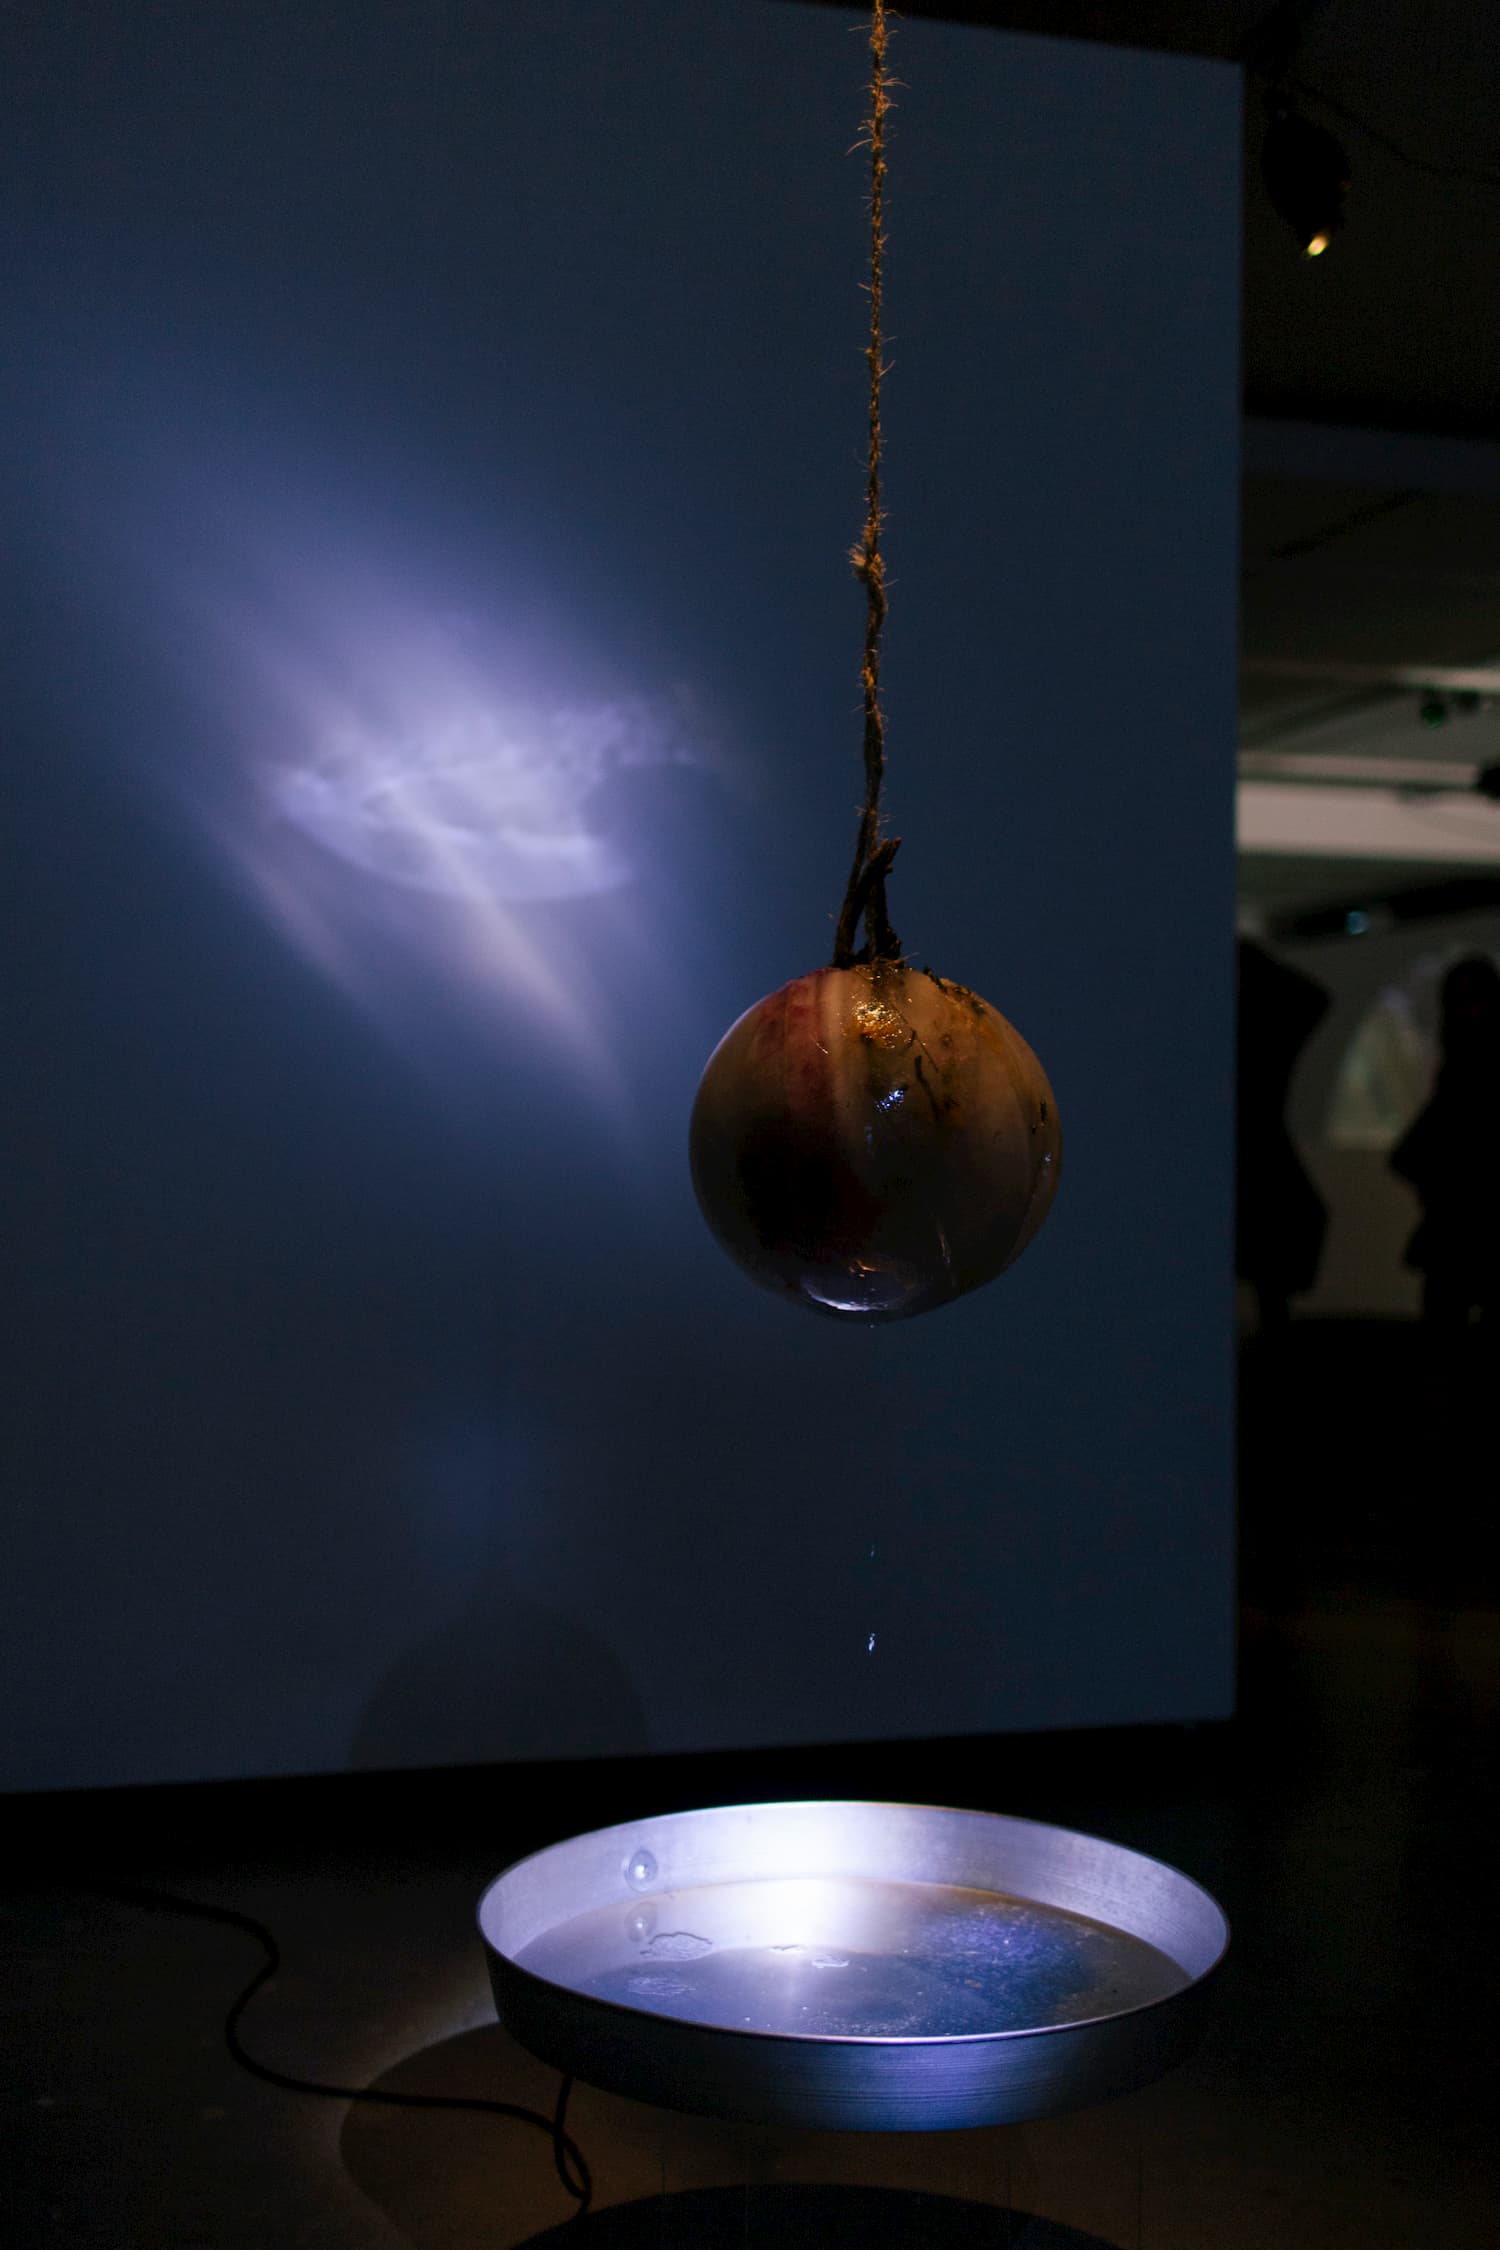 Sphere hanging by a style of thread over a pan of water. Joteva's solo show.